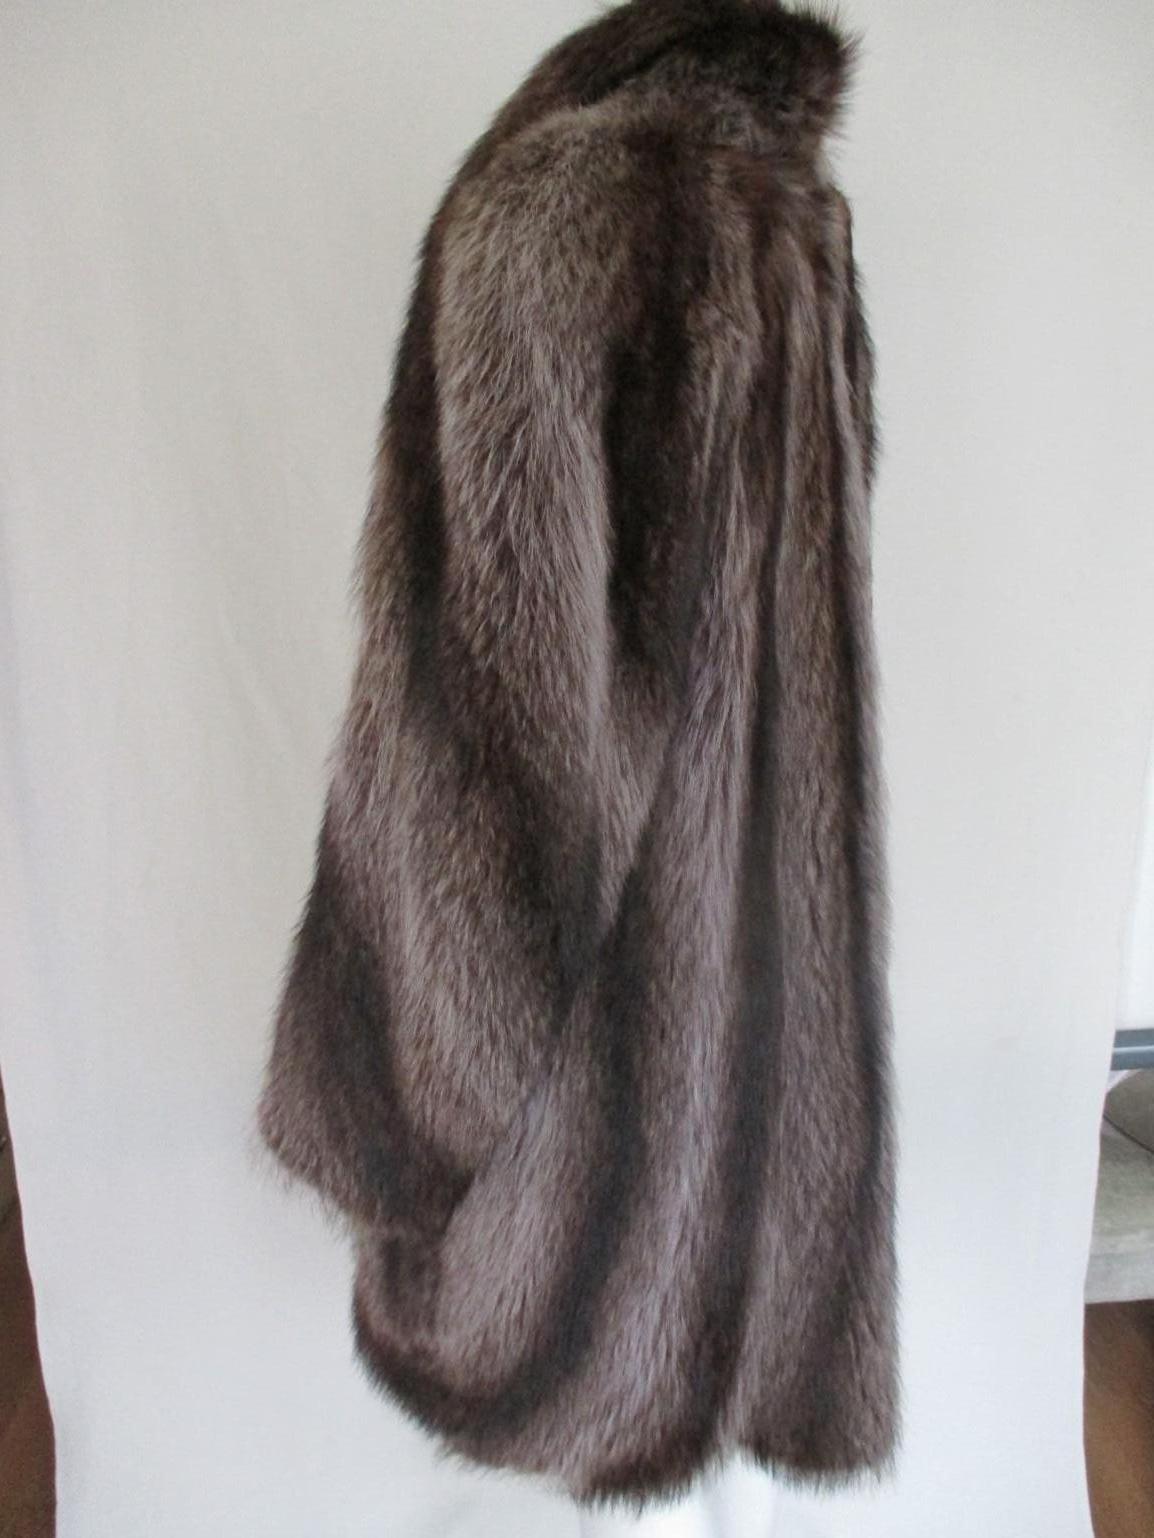 This vintage coat is made of very high quality silver raccoon soft fur, with 3/4 lenght has 1 hook at the collar, 2 closing hooks, 1 inside pocket and 2 pockets.
Rare to find! 

We offer more fur items, view our frontstore

Can be worn by male or